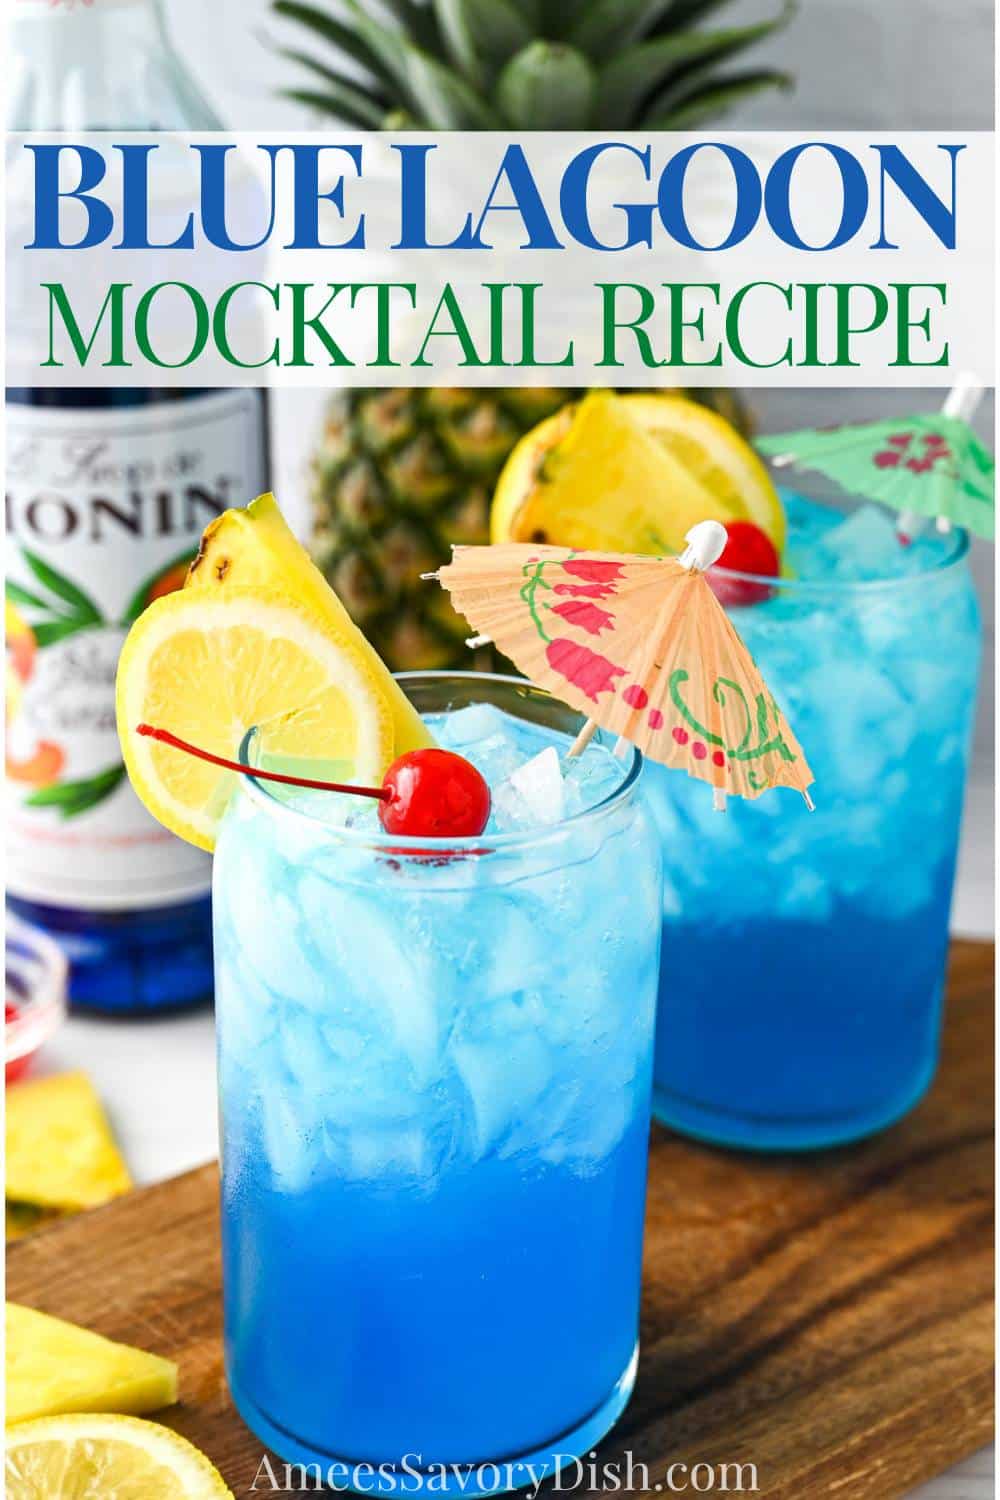 This Blue Lagoon Mocktail, made with blue curacao syrup, fresh lemonade, and a sparkling soda, is a sweet and citrusy Caribbean-sea-colored drink the whole family can dive into! Perfect for essentially any occasion! via @Ameessavorydish